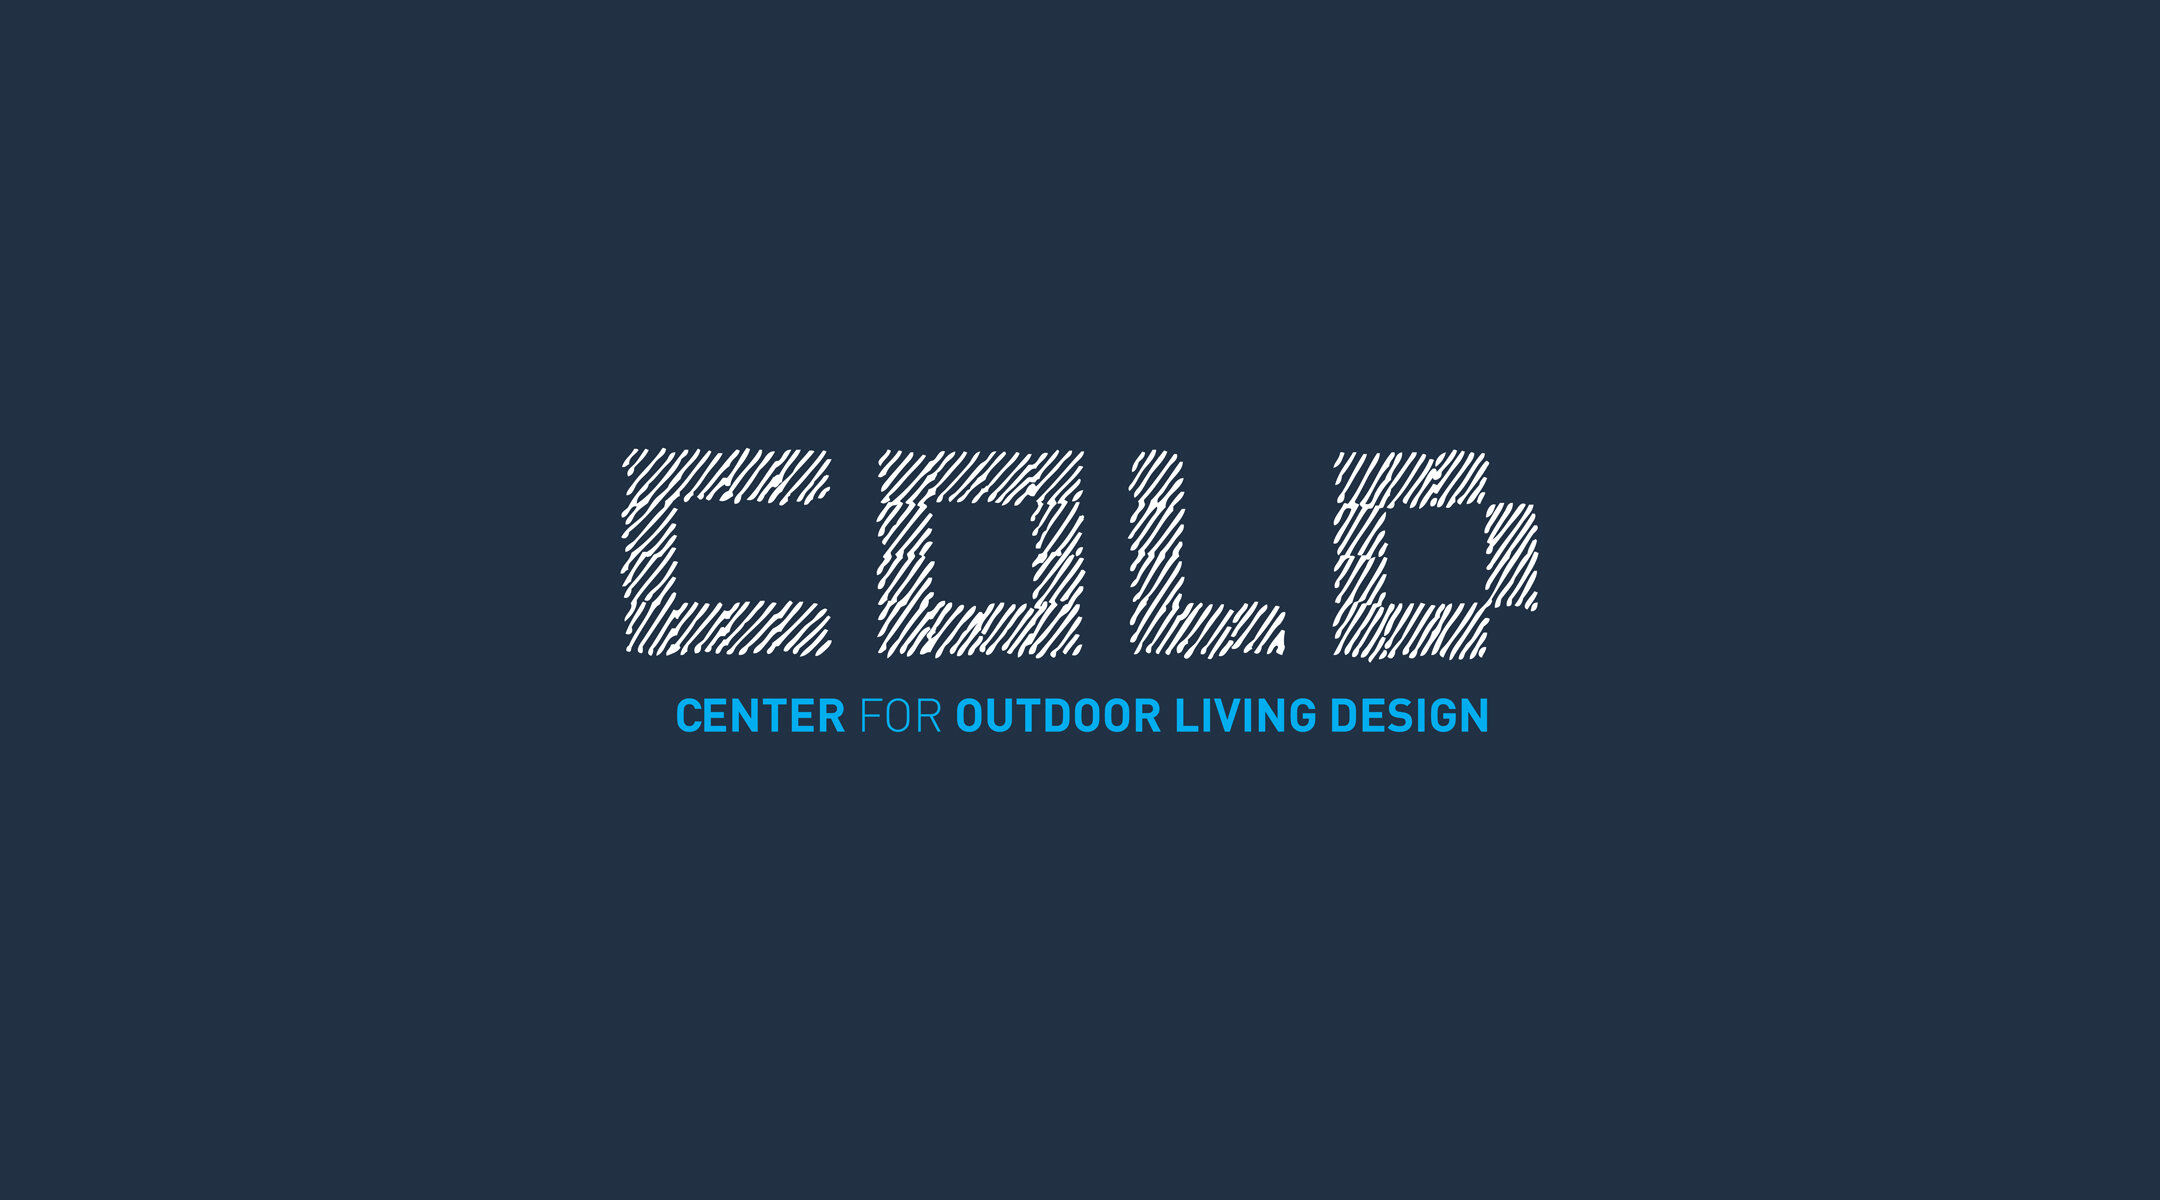 COLD: Center for Outdoor Living Design